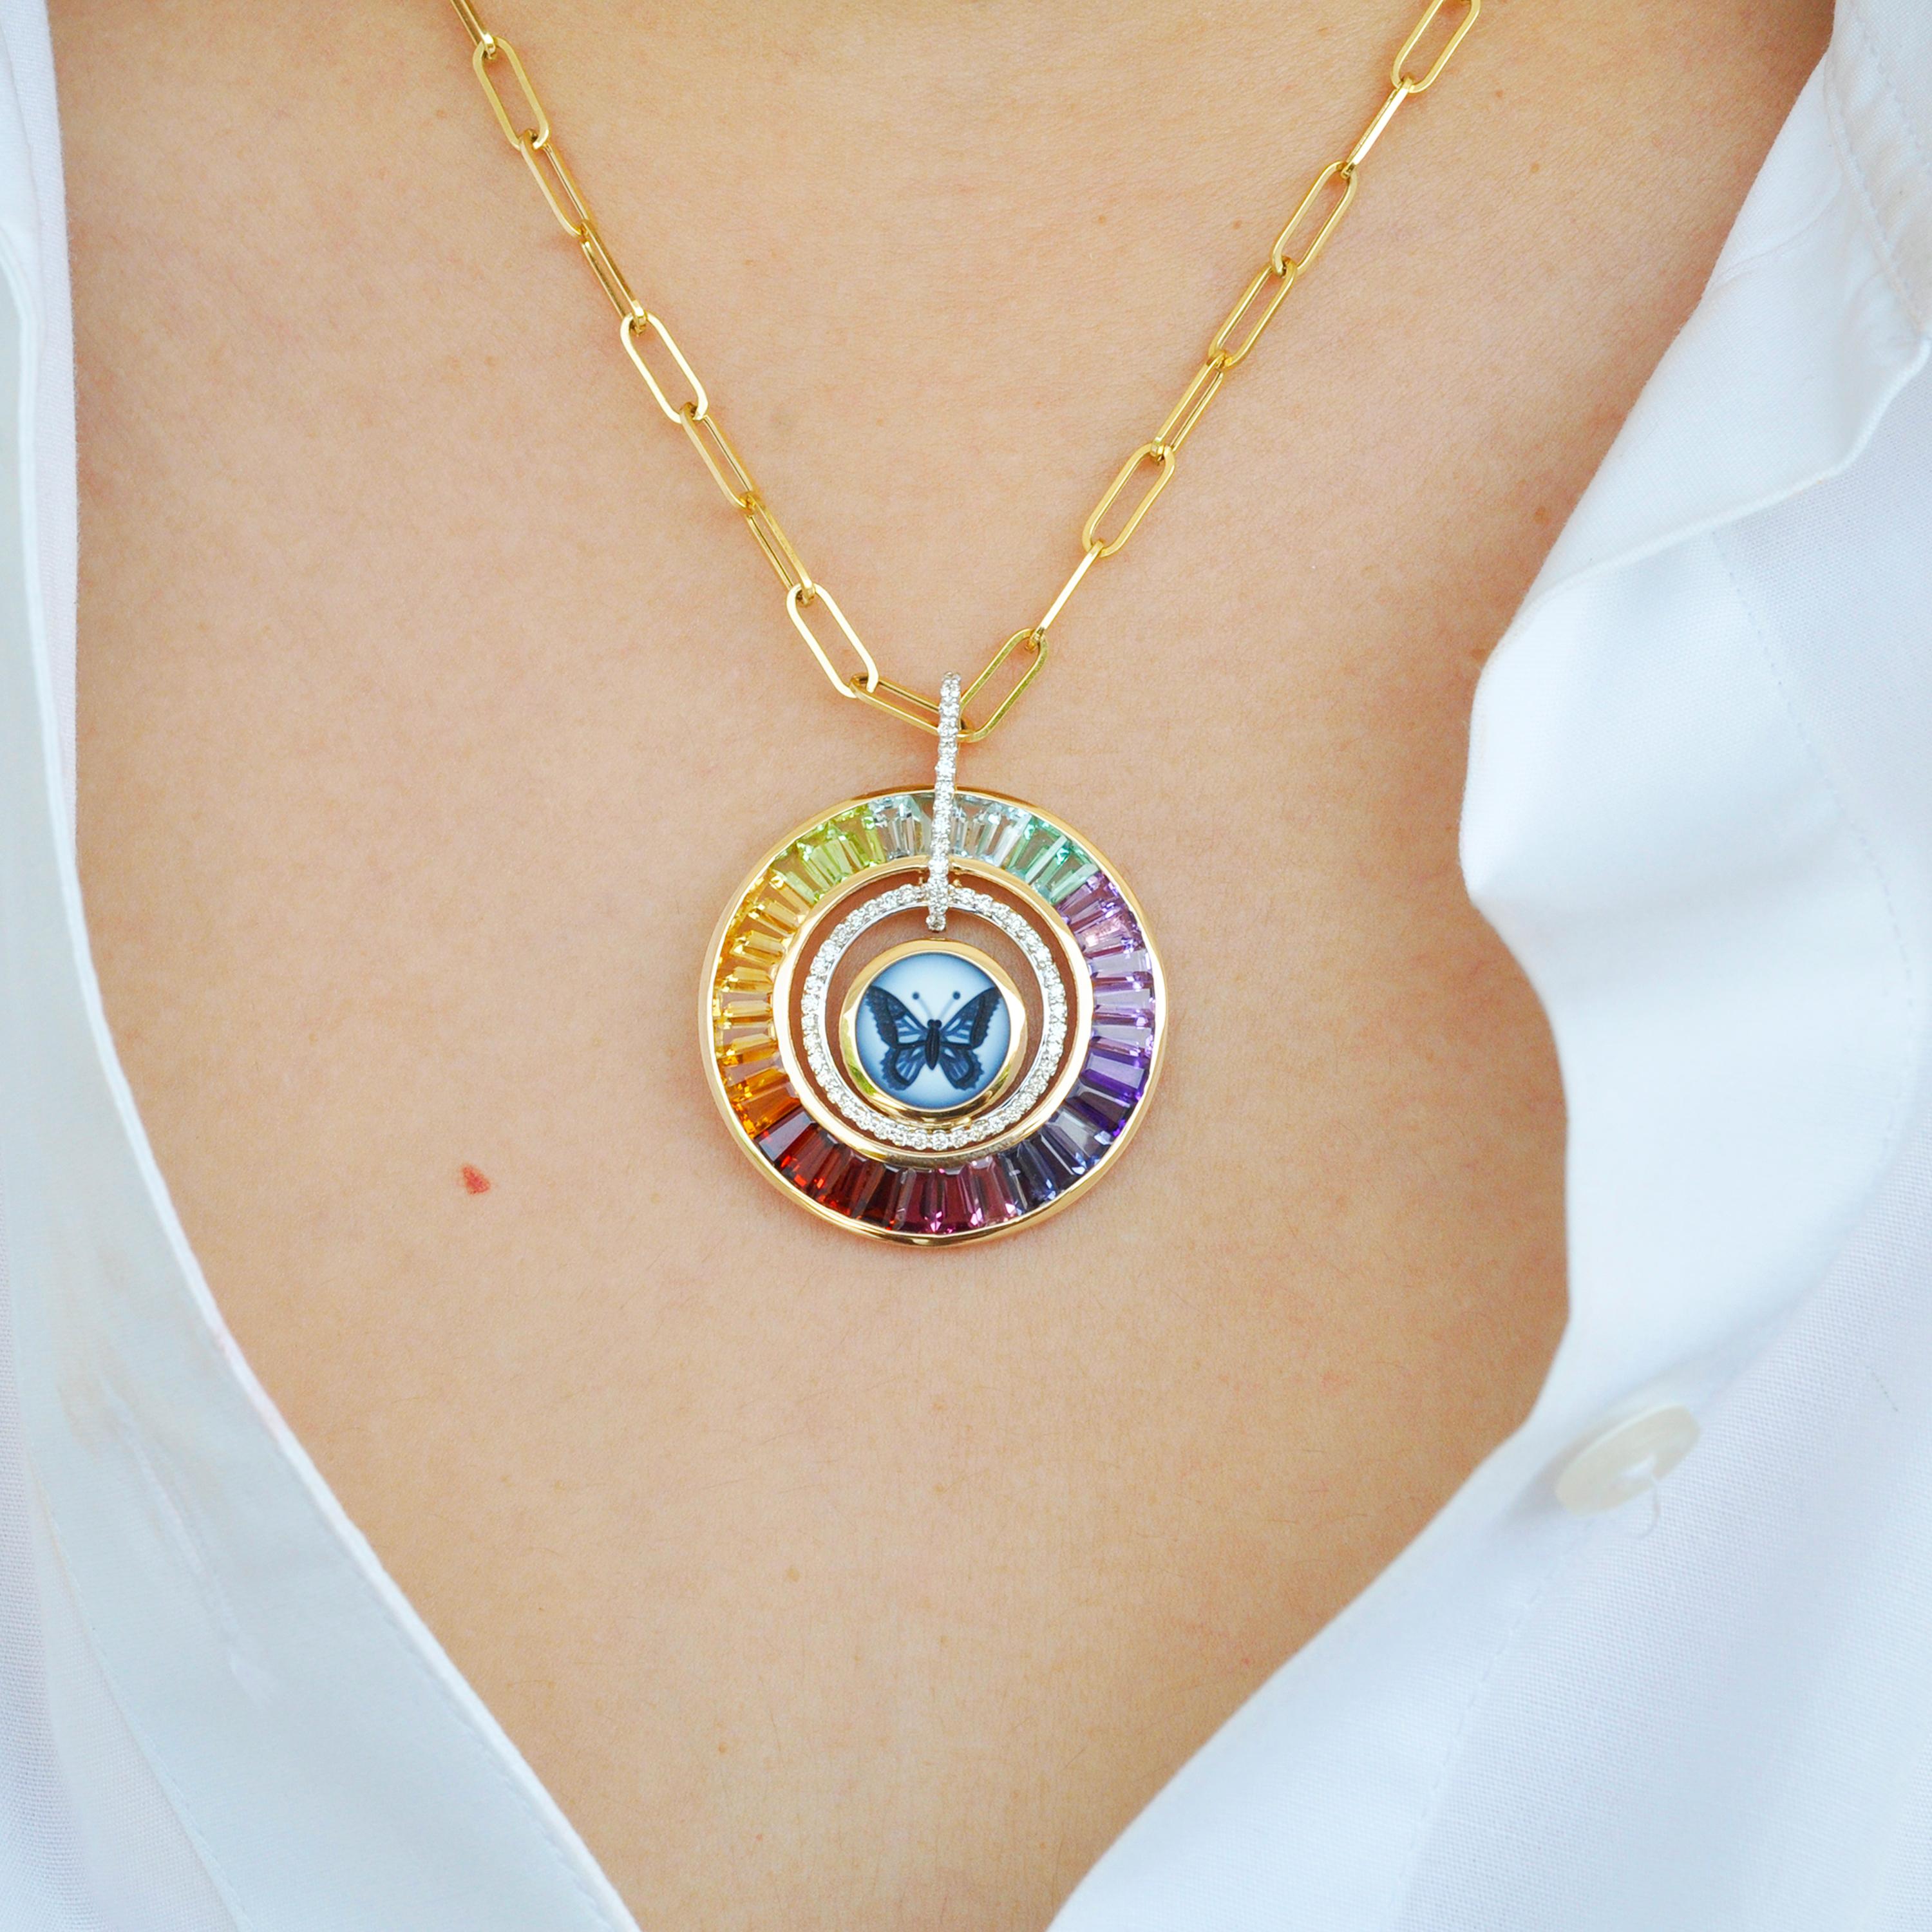 18 karat yellow gold butterfly intaglio multicolor rainbow taper baguette circle pendant necklace.

